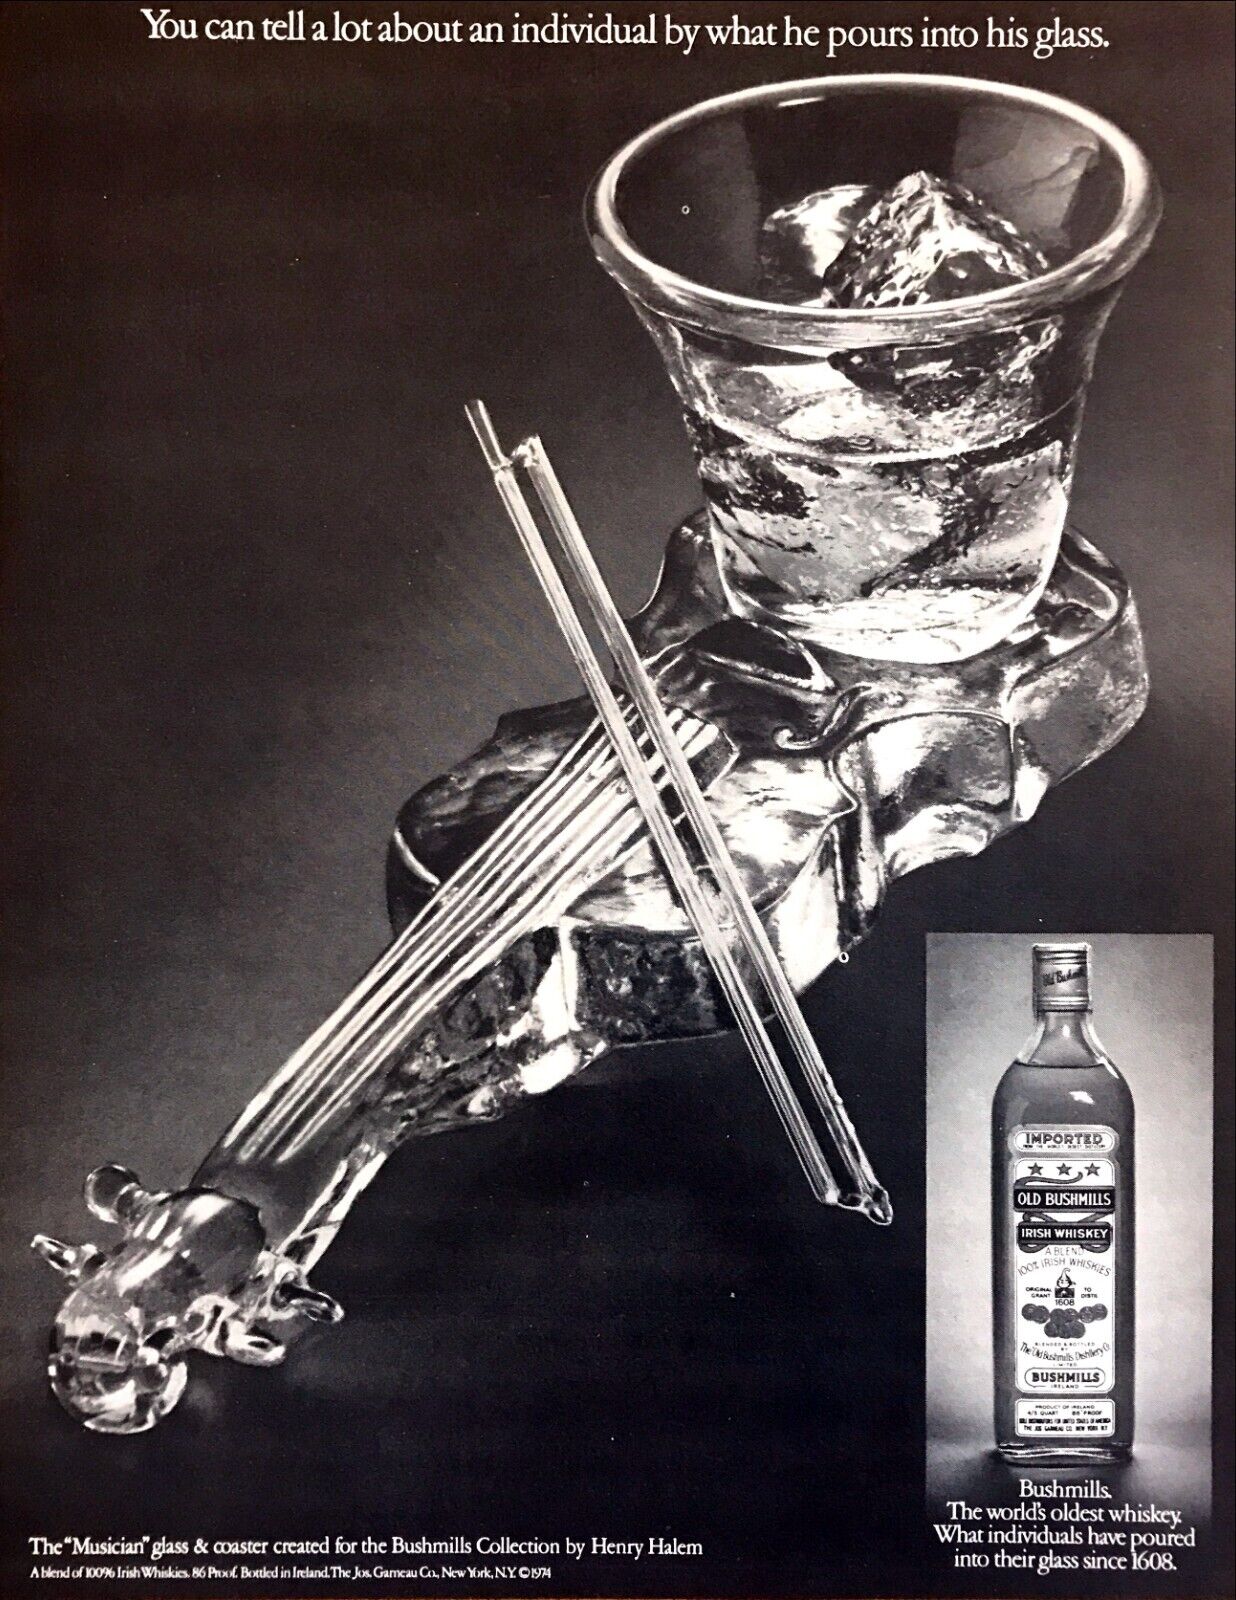 1976 Tennis Racquet Glass photo by Henry Halem Old Bushmills Whiskey print ad